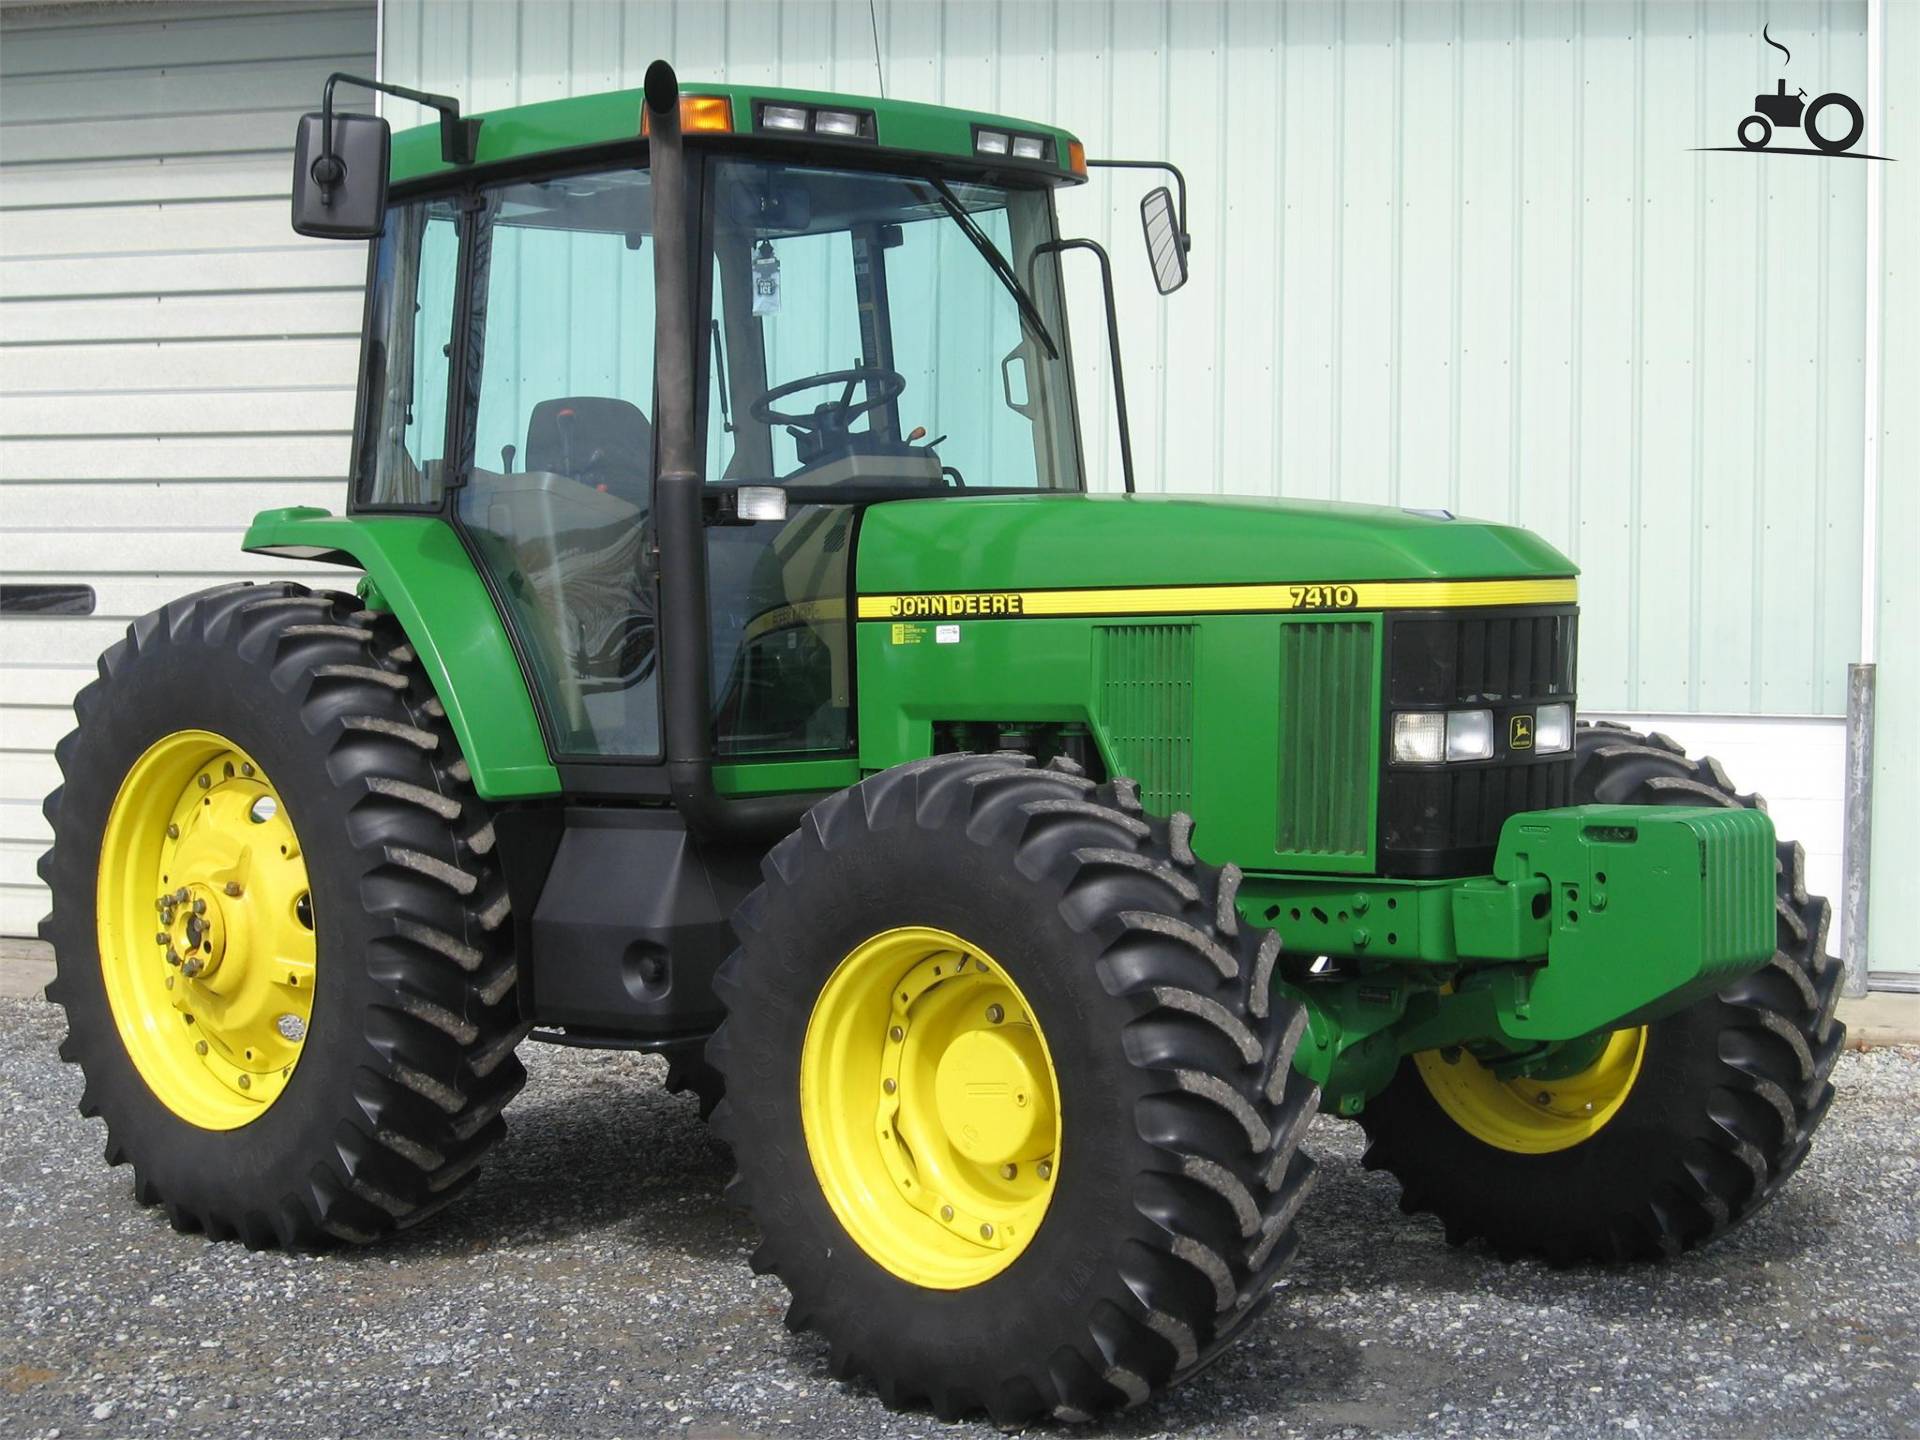 John Deere 7410 Specs and data - Everything about the John ...